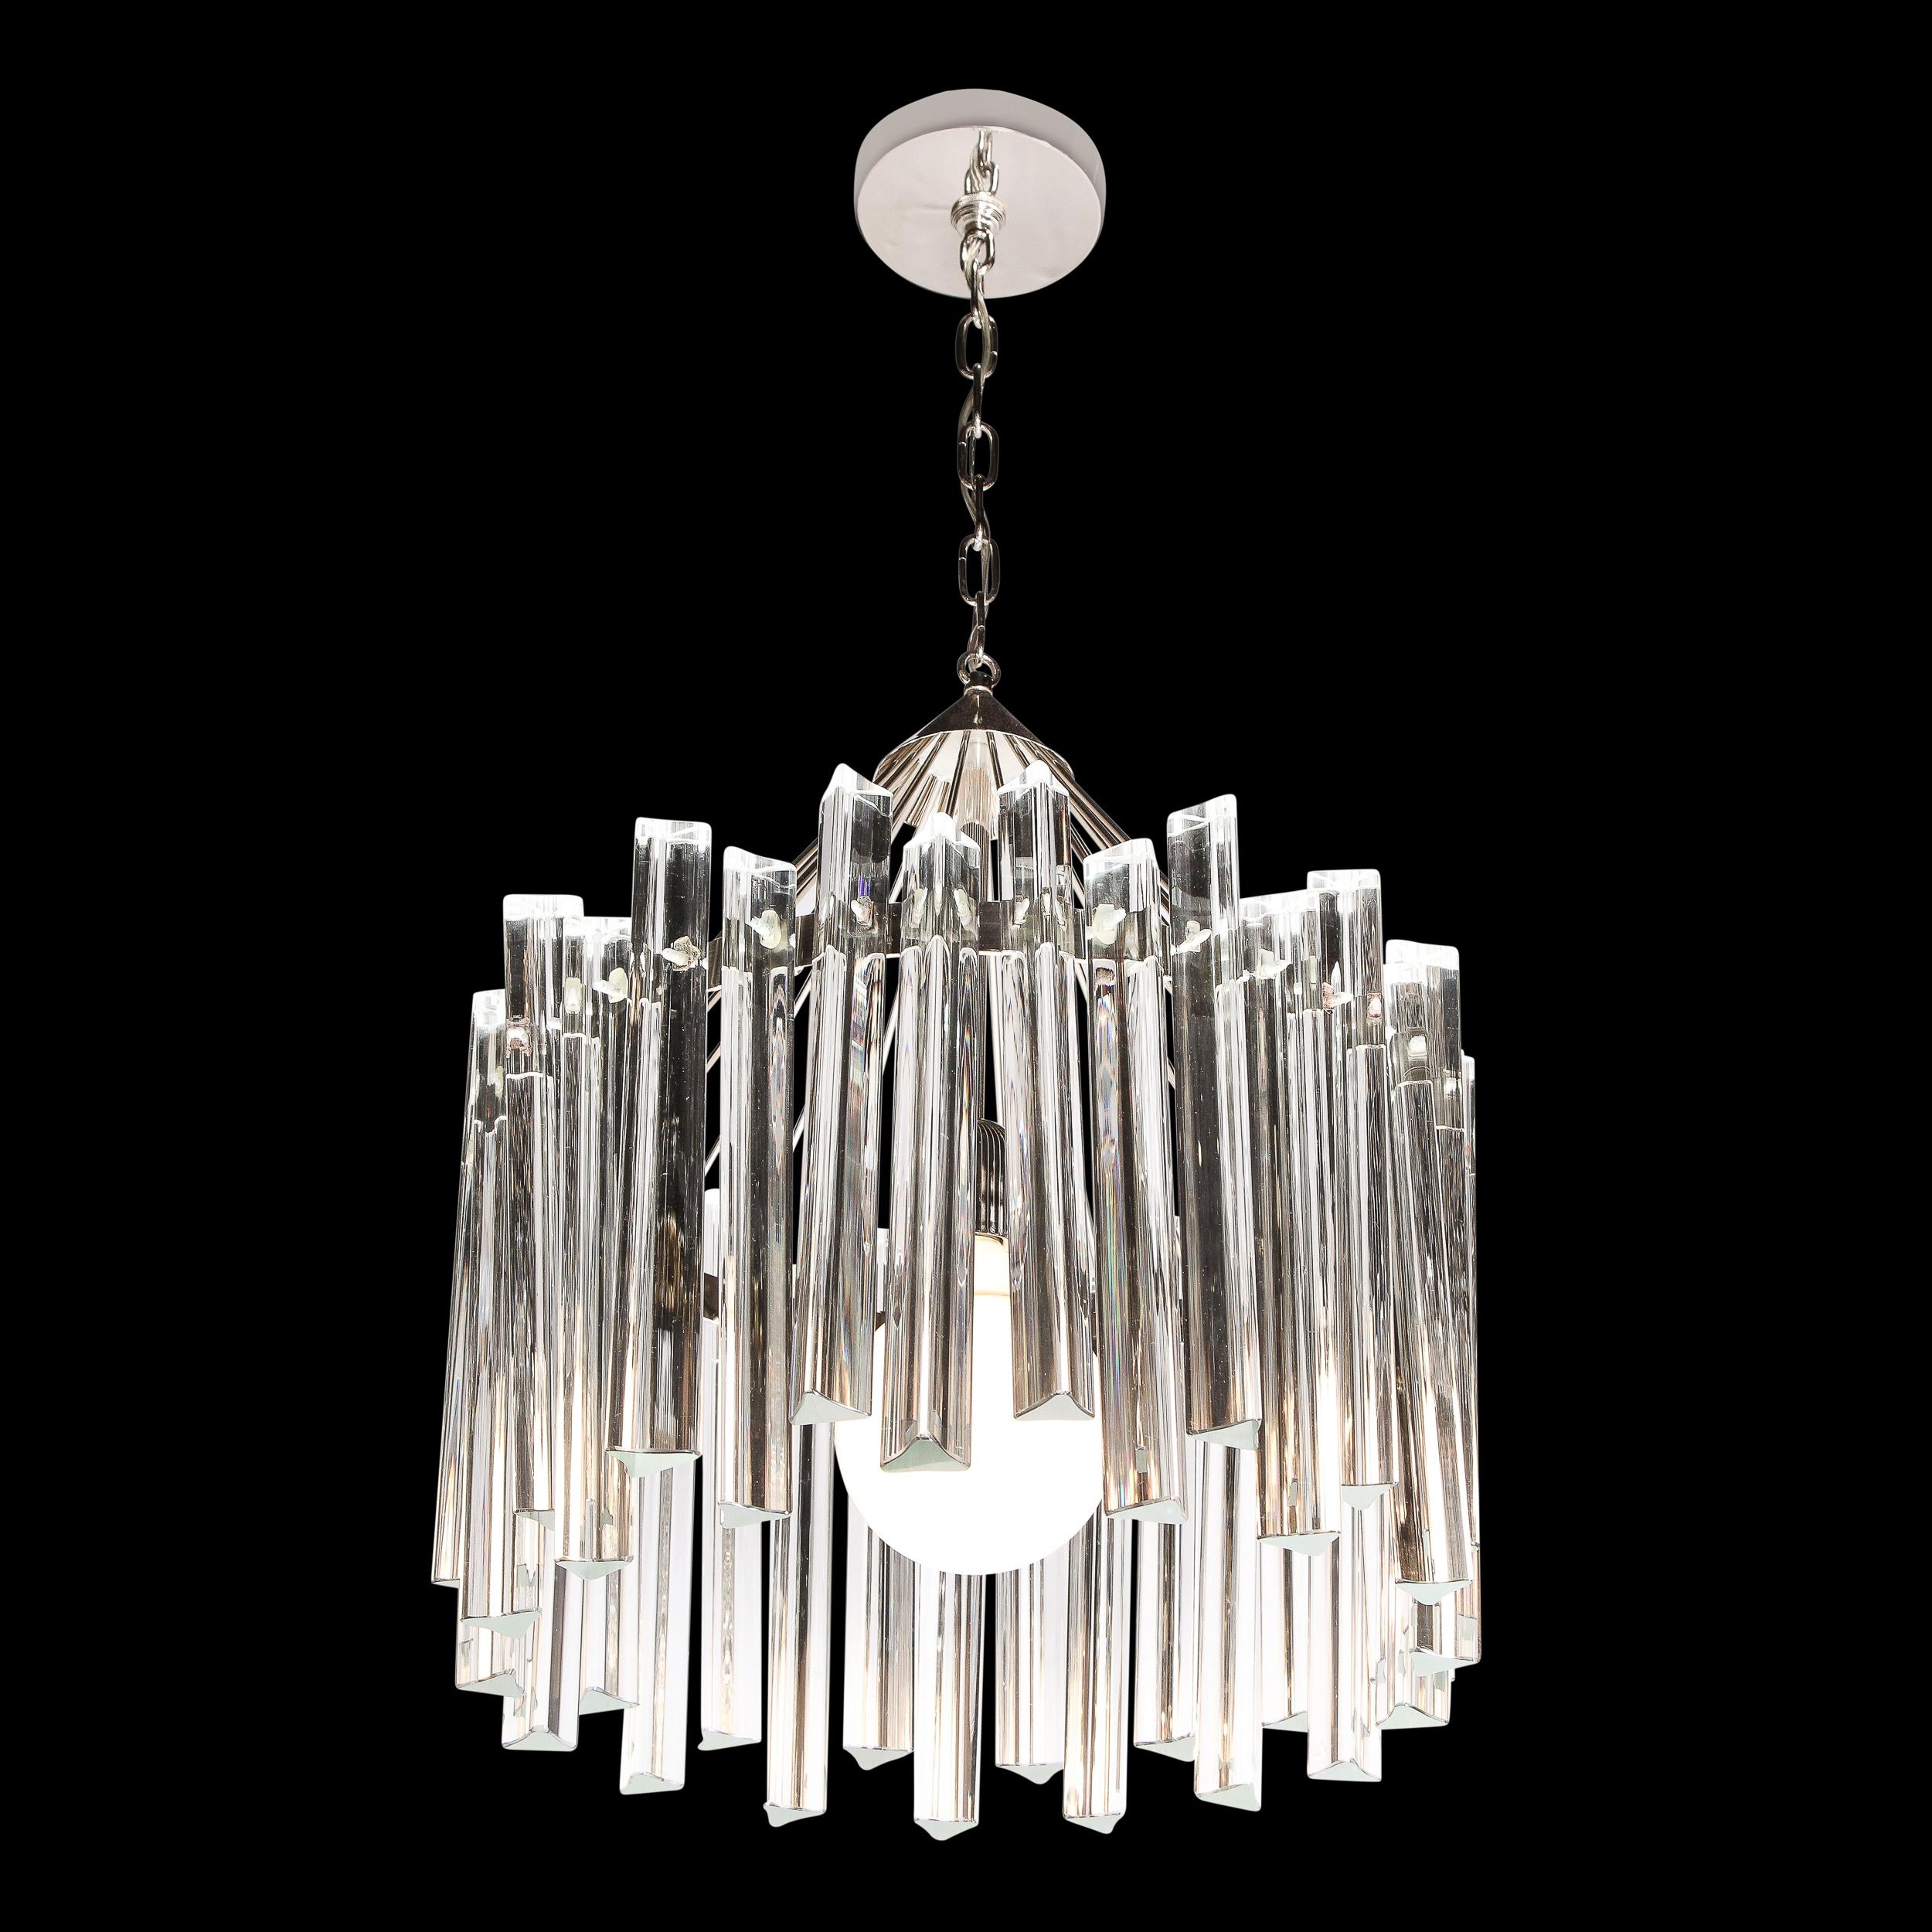 Mid-Century Modern Polished Chrome & Translucent Murano Glass Triedre Chandelier In Excellent Condition For Sale In New York, NY